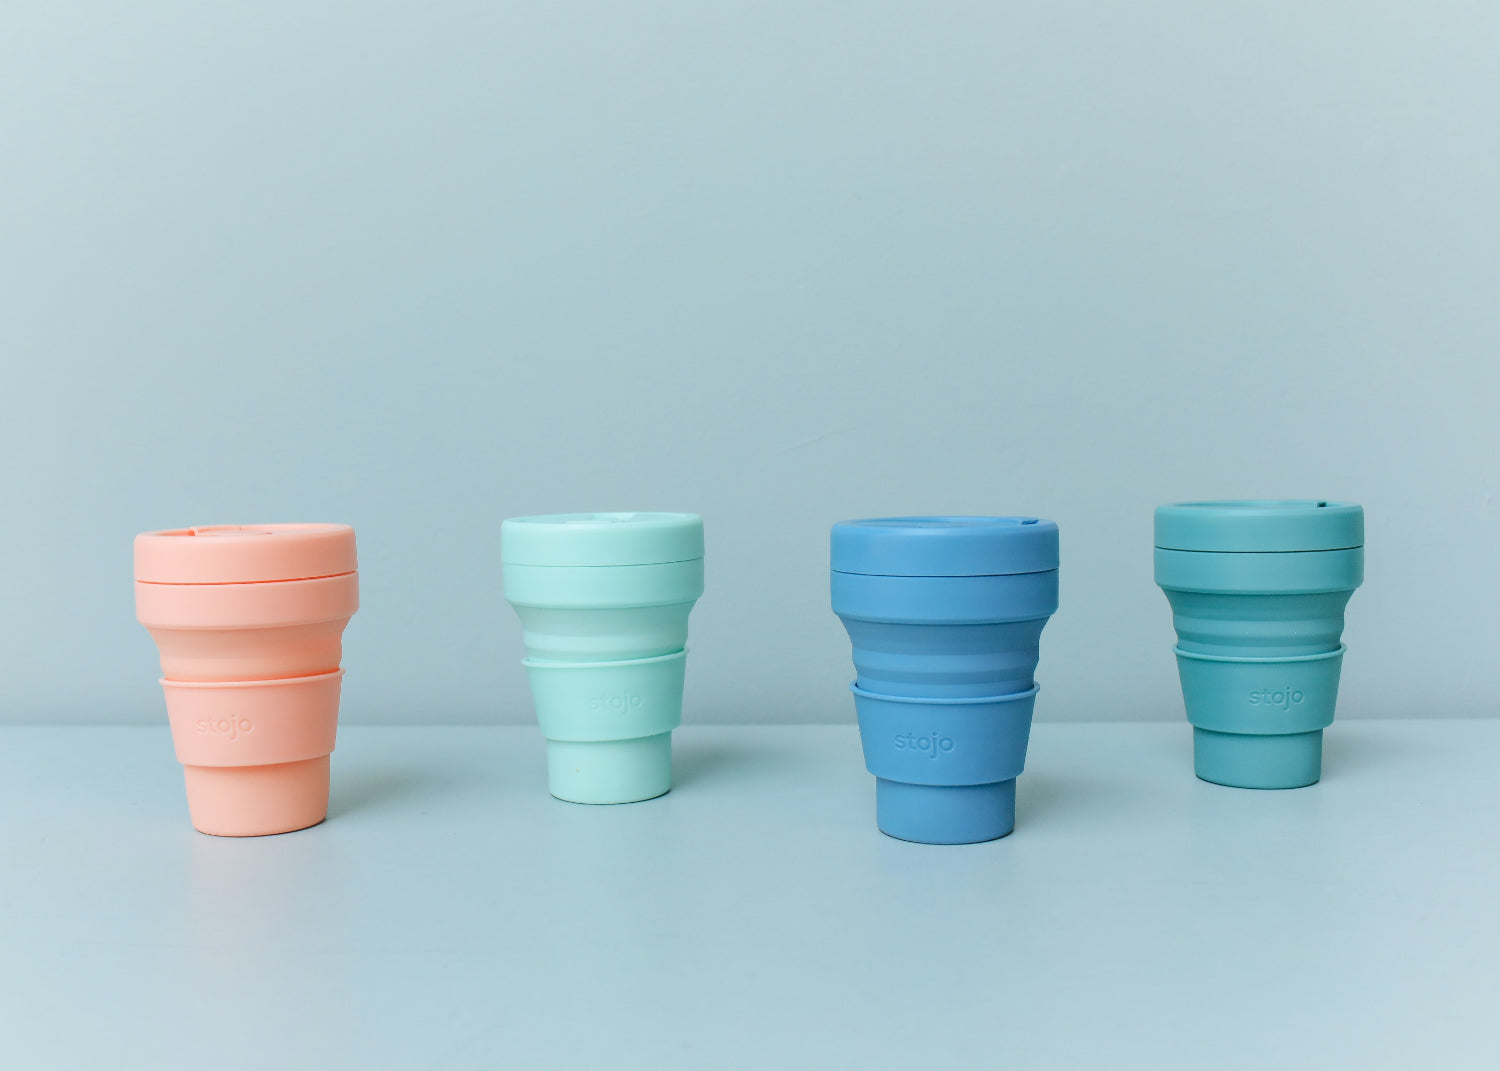 Four silicone coffee mugs in a row, good candidates for white label products